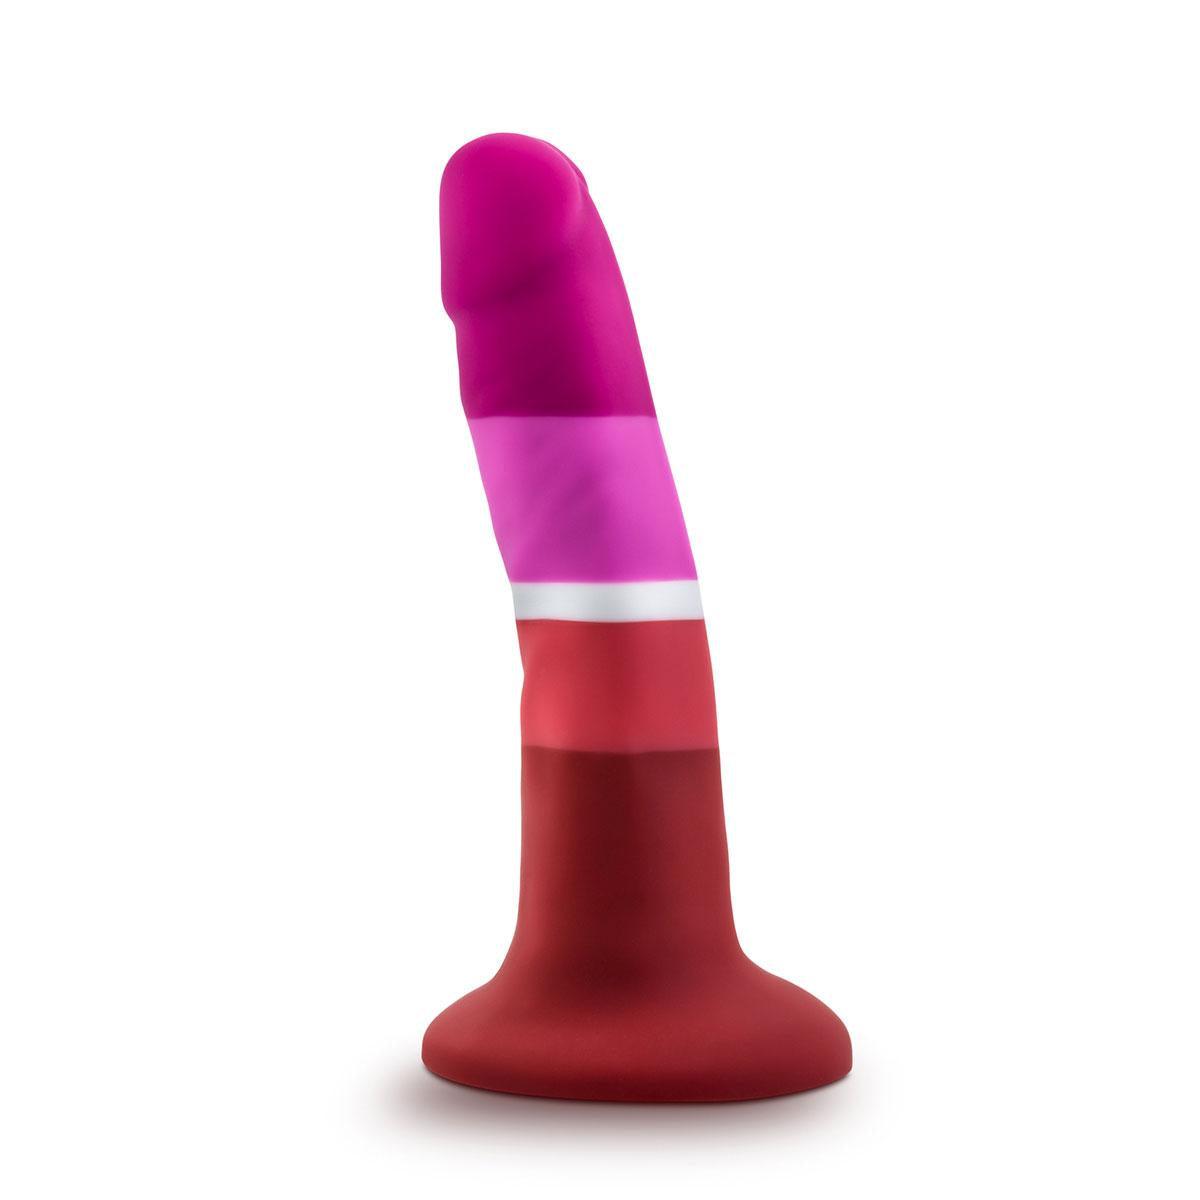 Avant Pride P3 Lesbian - Buy At Luxury Toy X - Free 3-Day Shipping